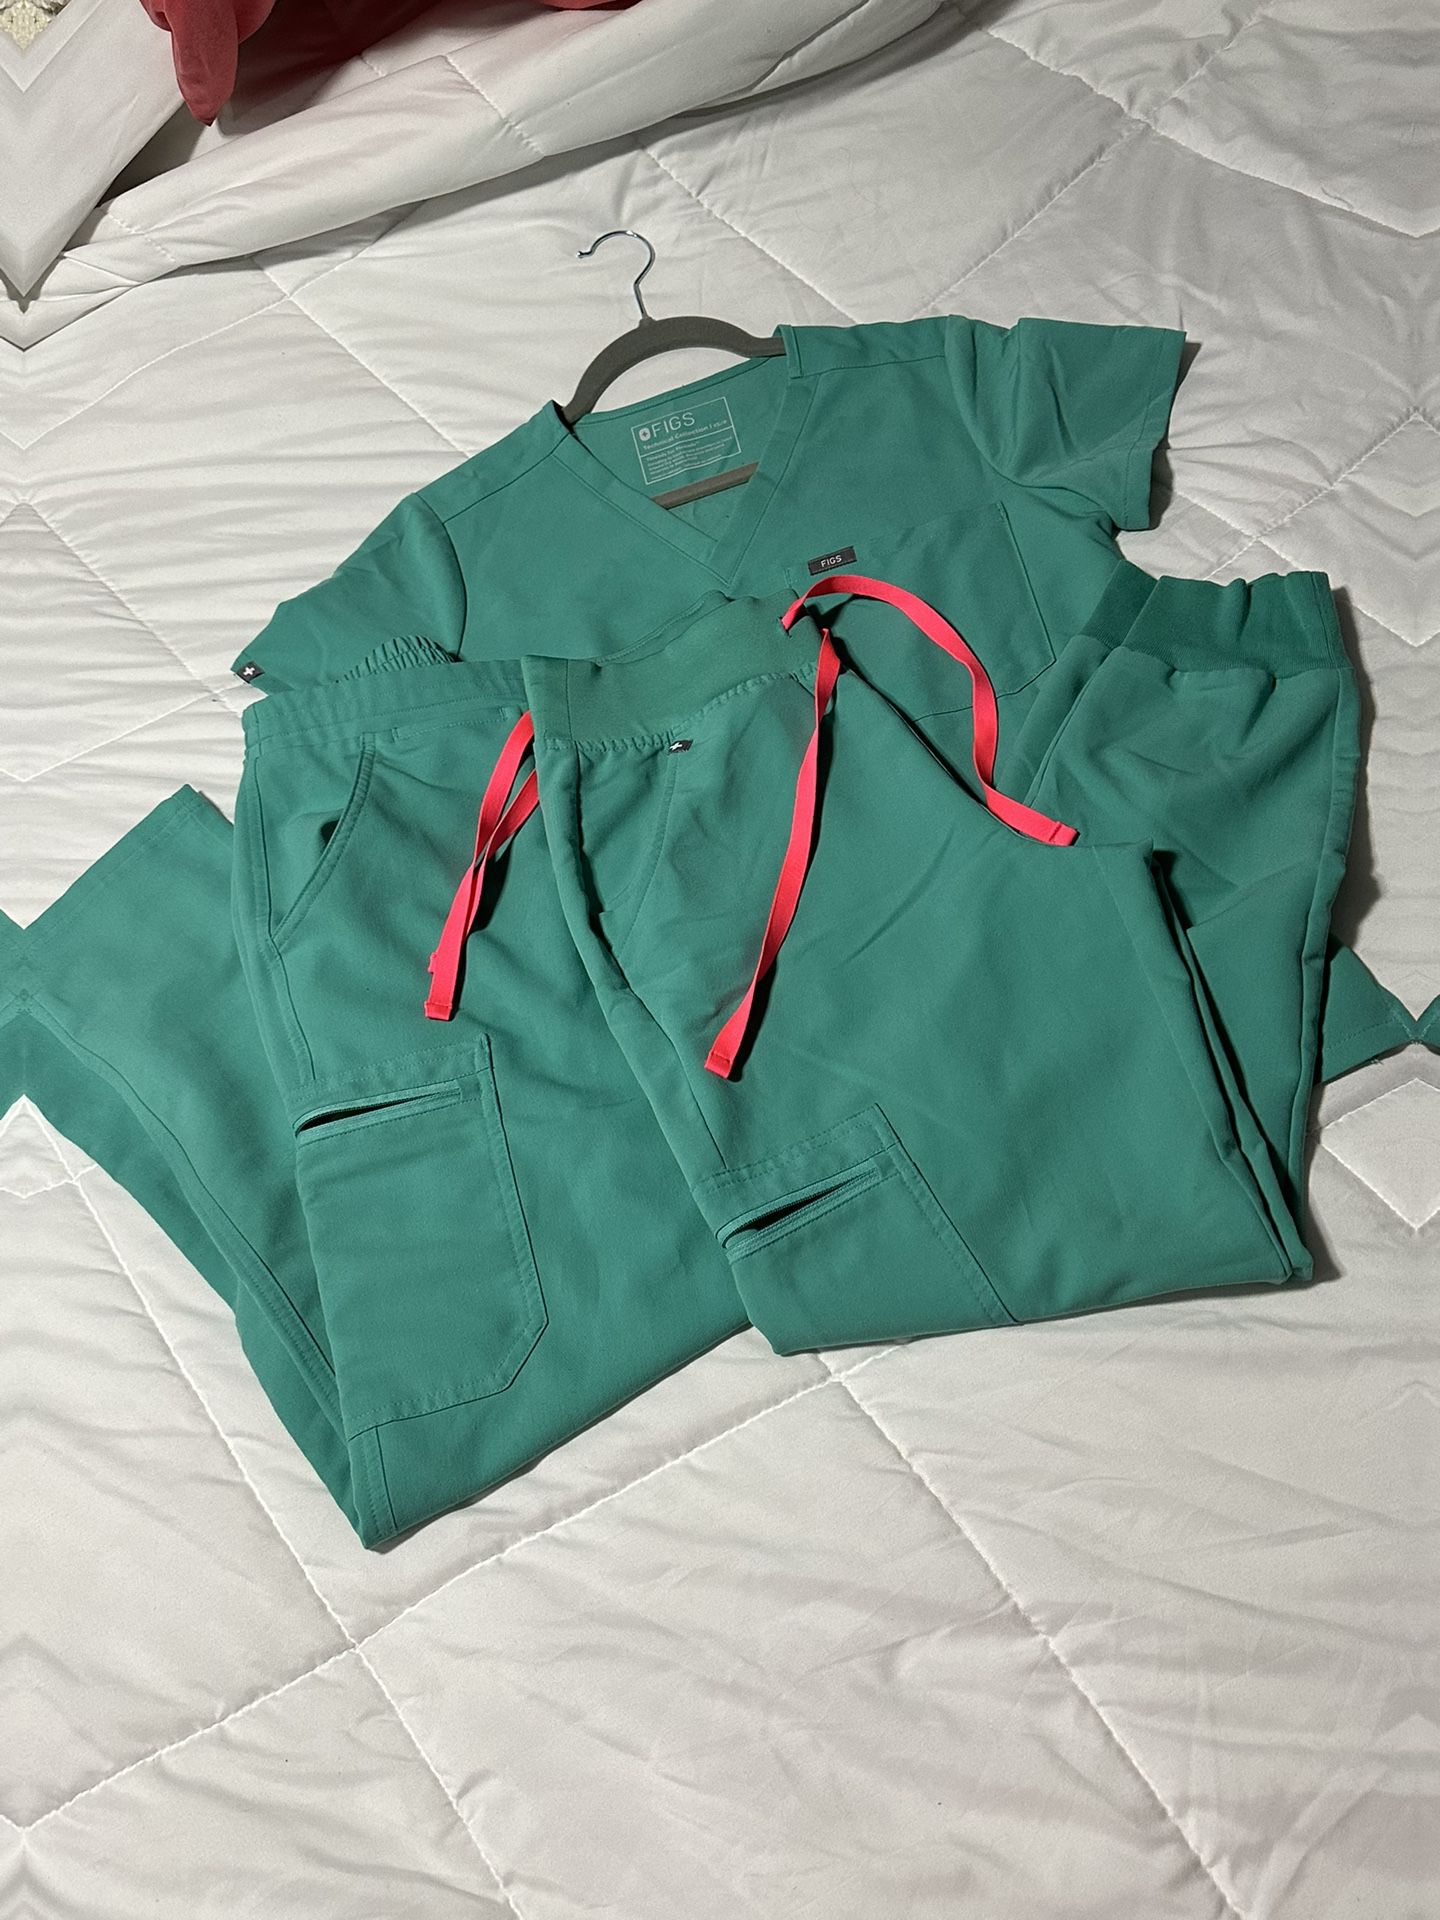 Figs Green Scrub Set EXCELLENT CONDITION